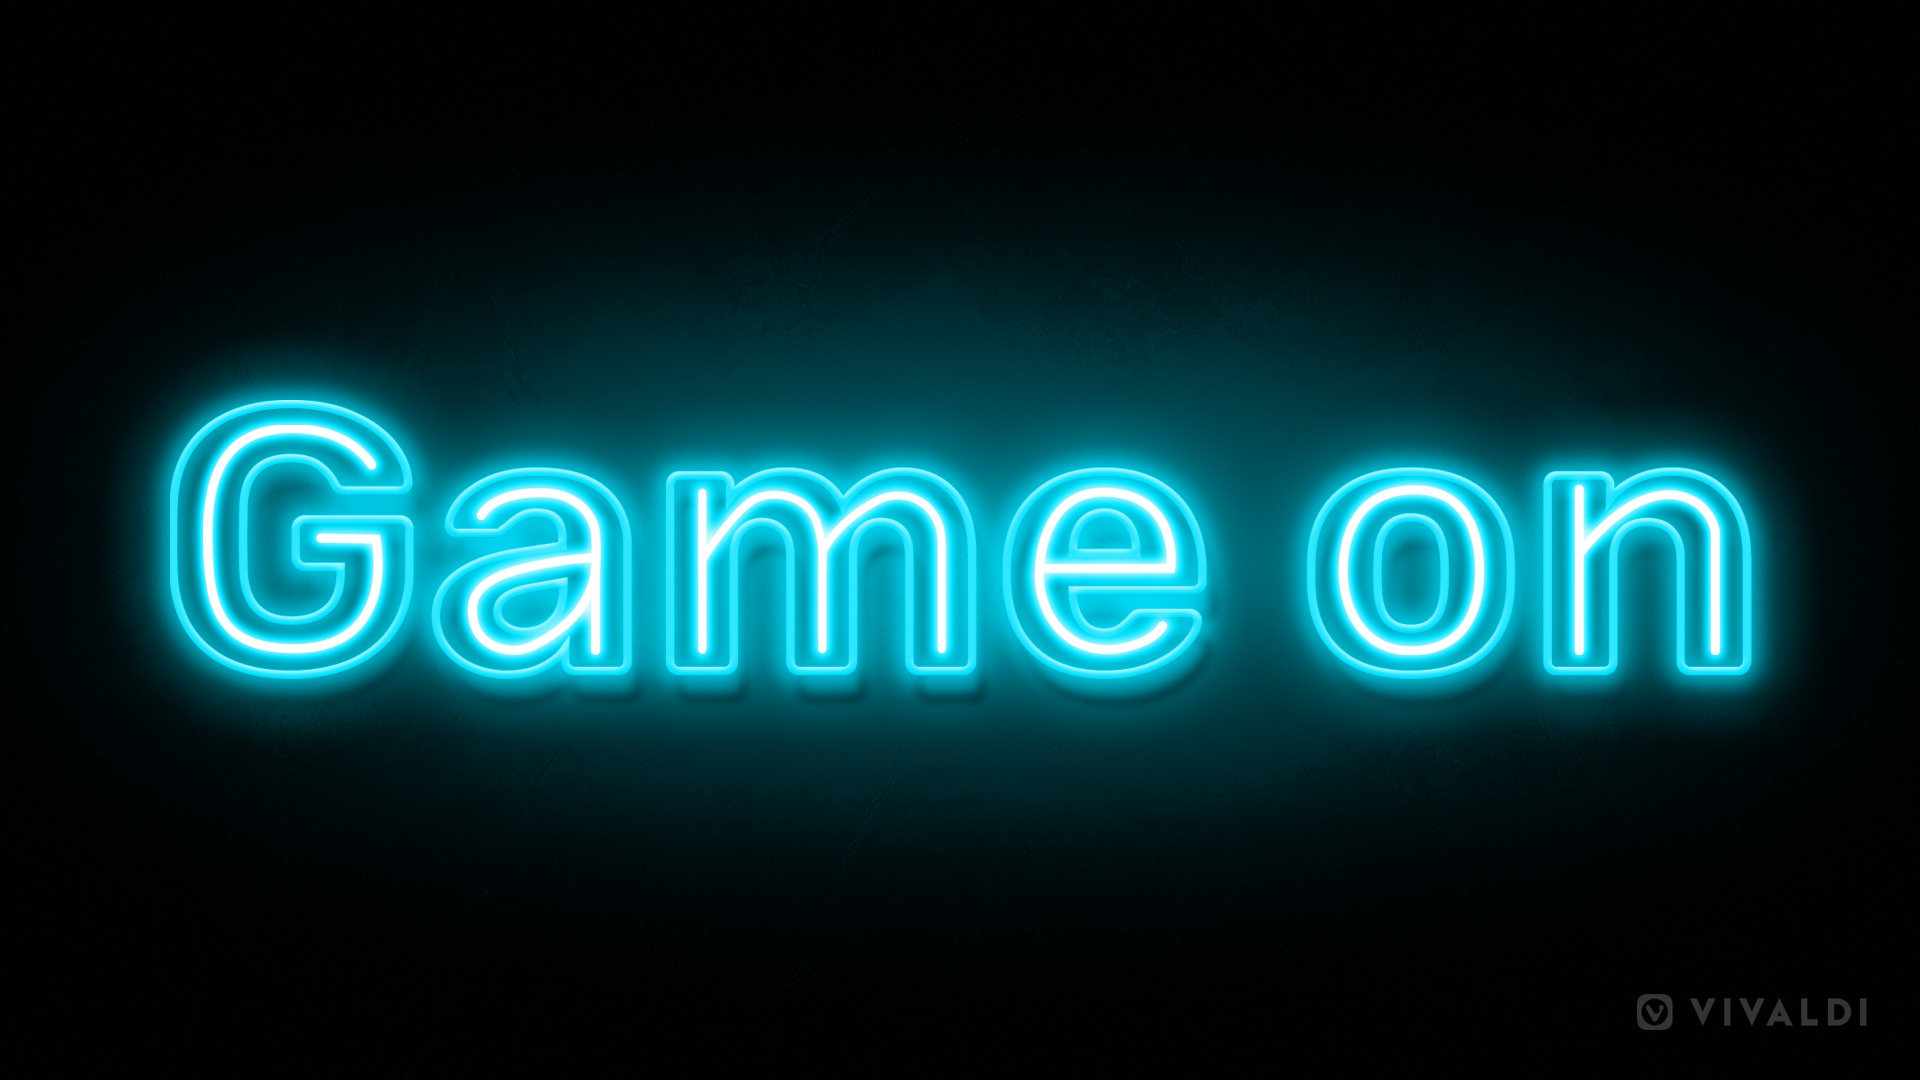 Game on neon sign